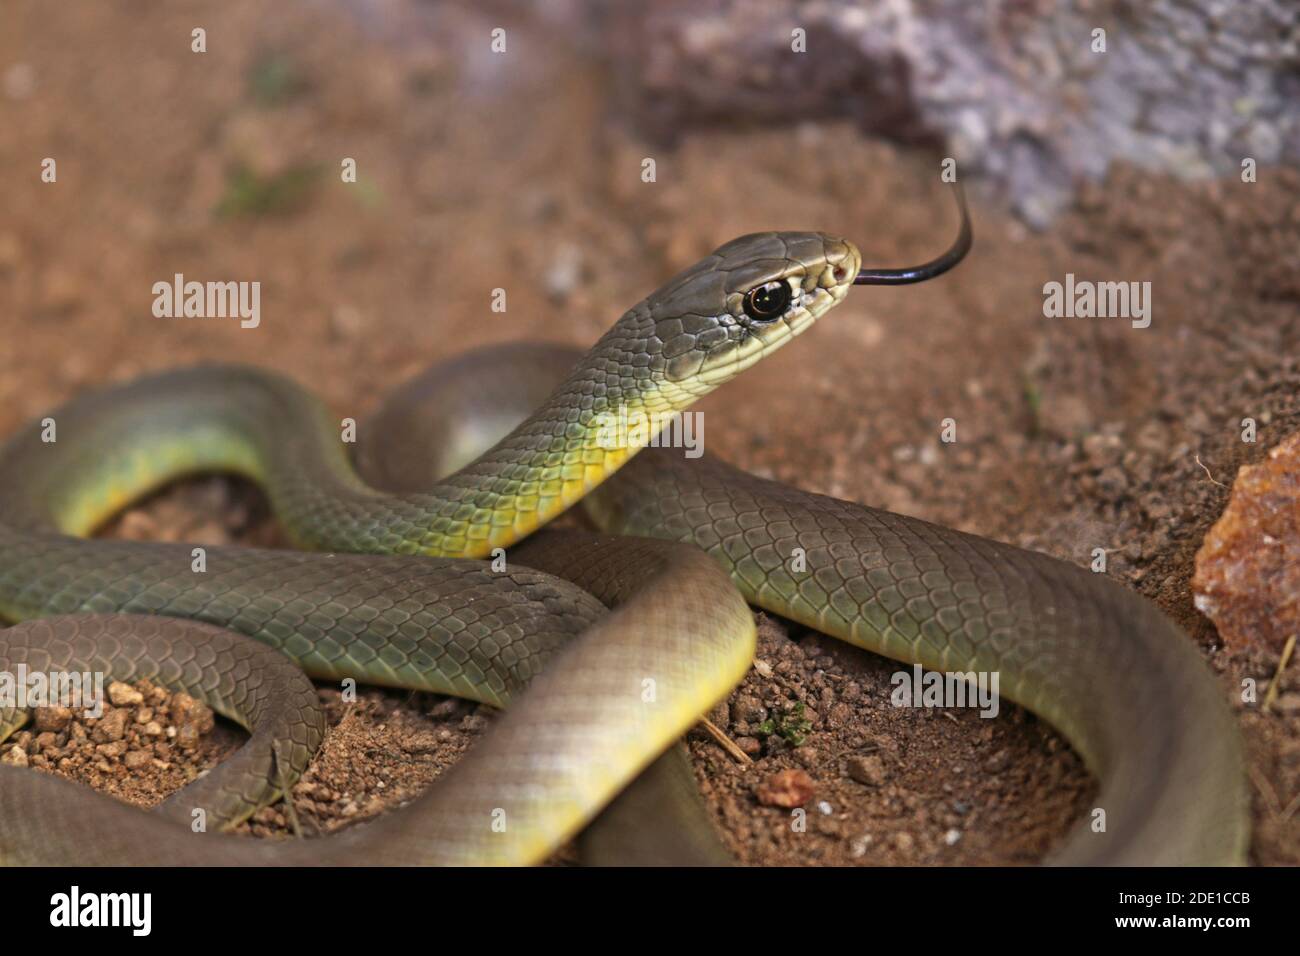 Western Yellow-belled Racer Snake (Coluber constrictor mormon) Stock Photo